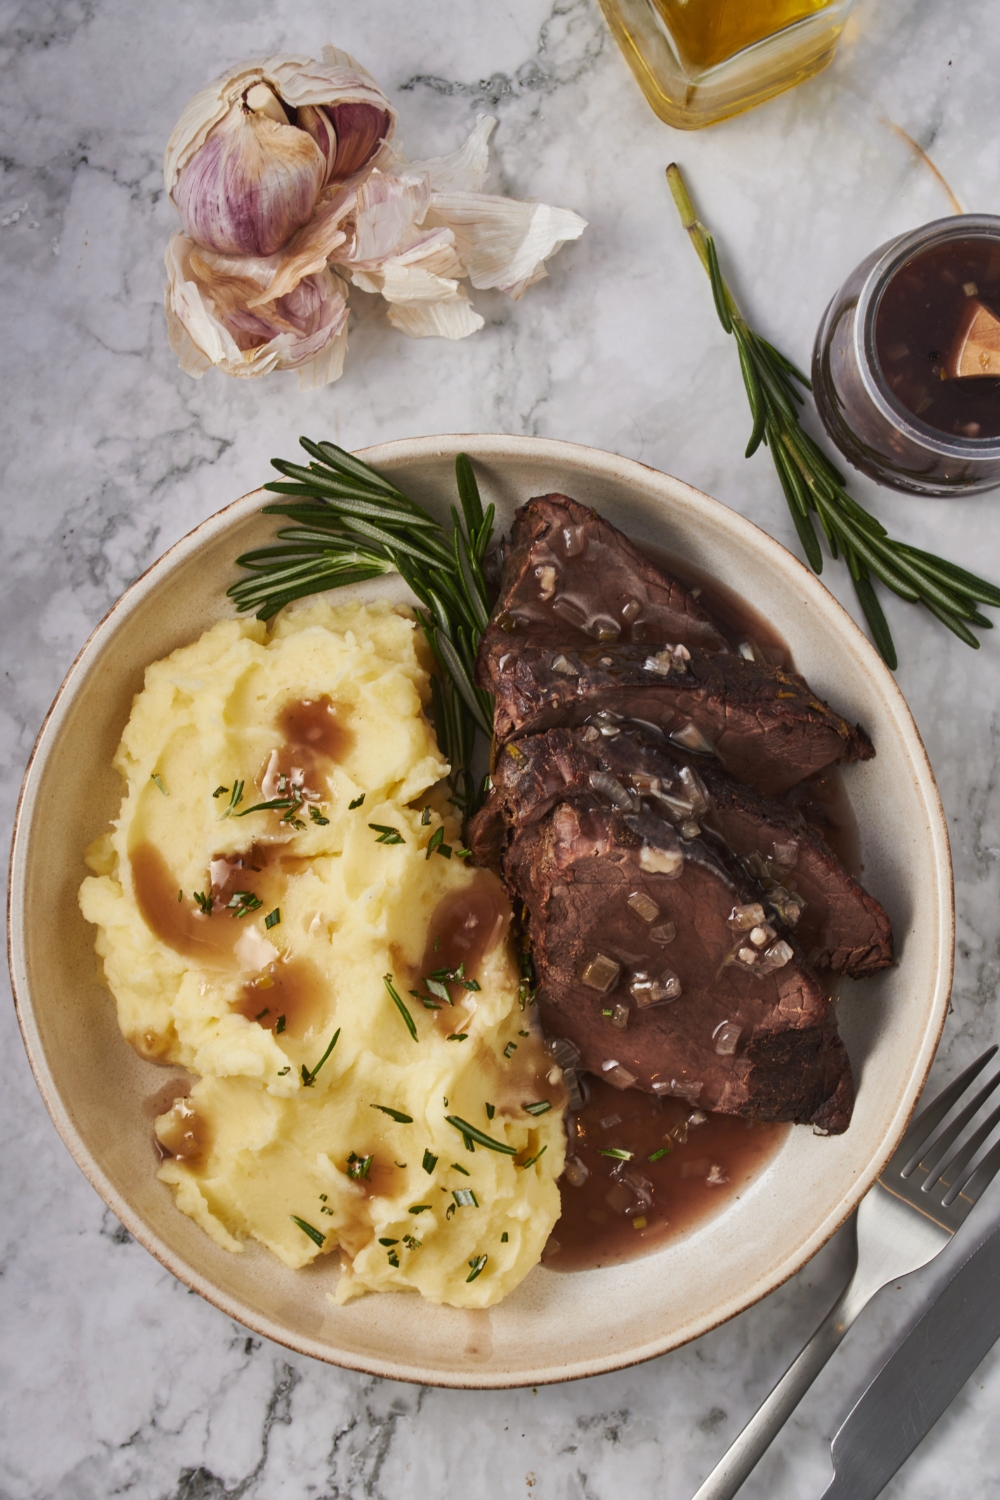 Overhead view of a plate of sliced chuck roast covered in a gravy with a fresh sprig of rosemary and a pile of mashed potatoes garnished with fresh herbs and some gravy poured over top of the potatoes.